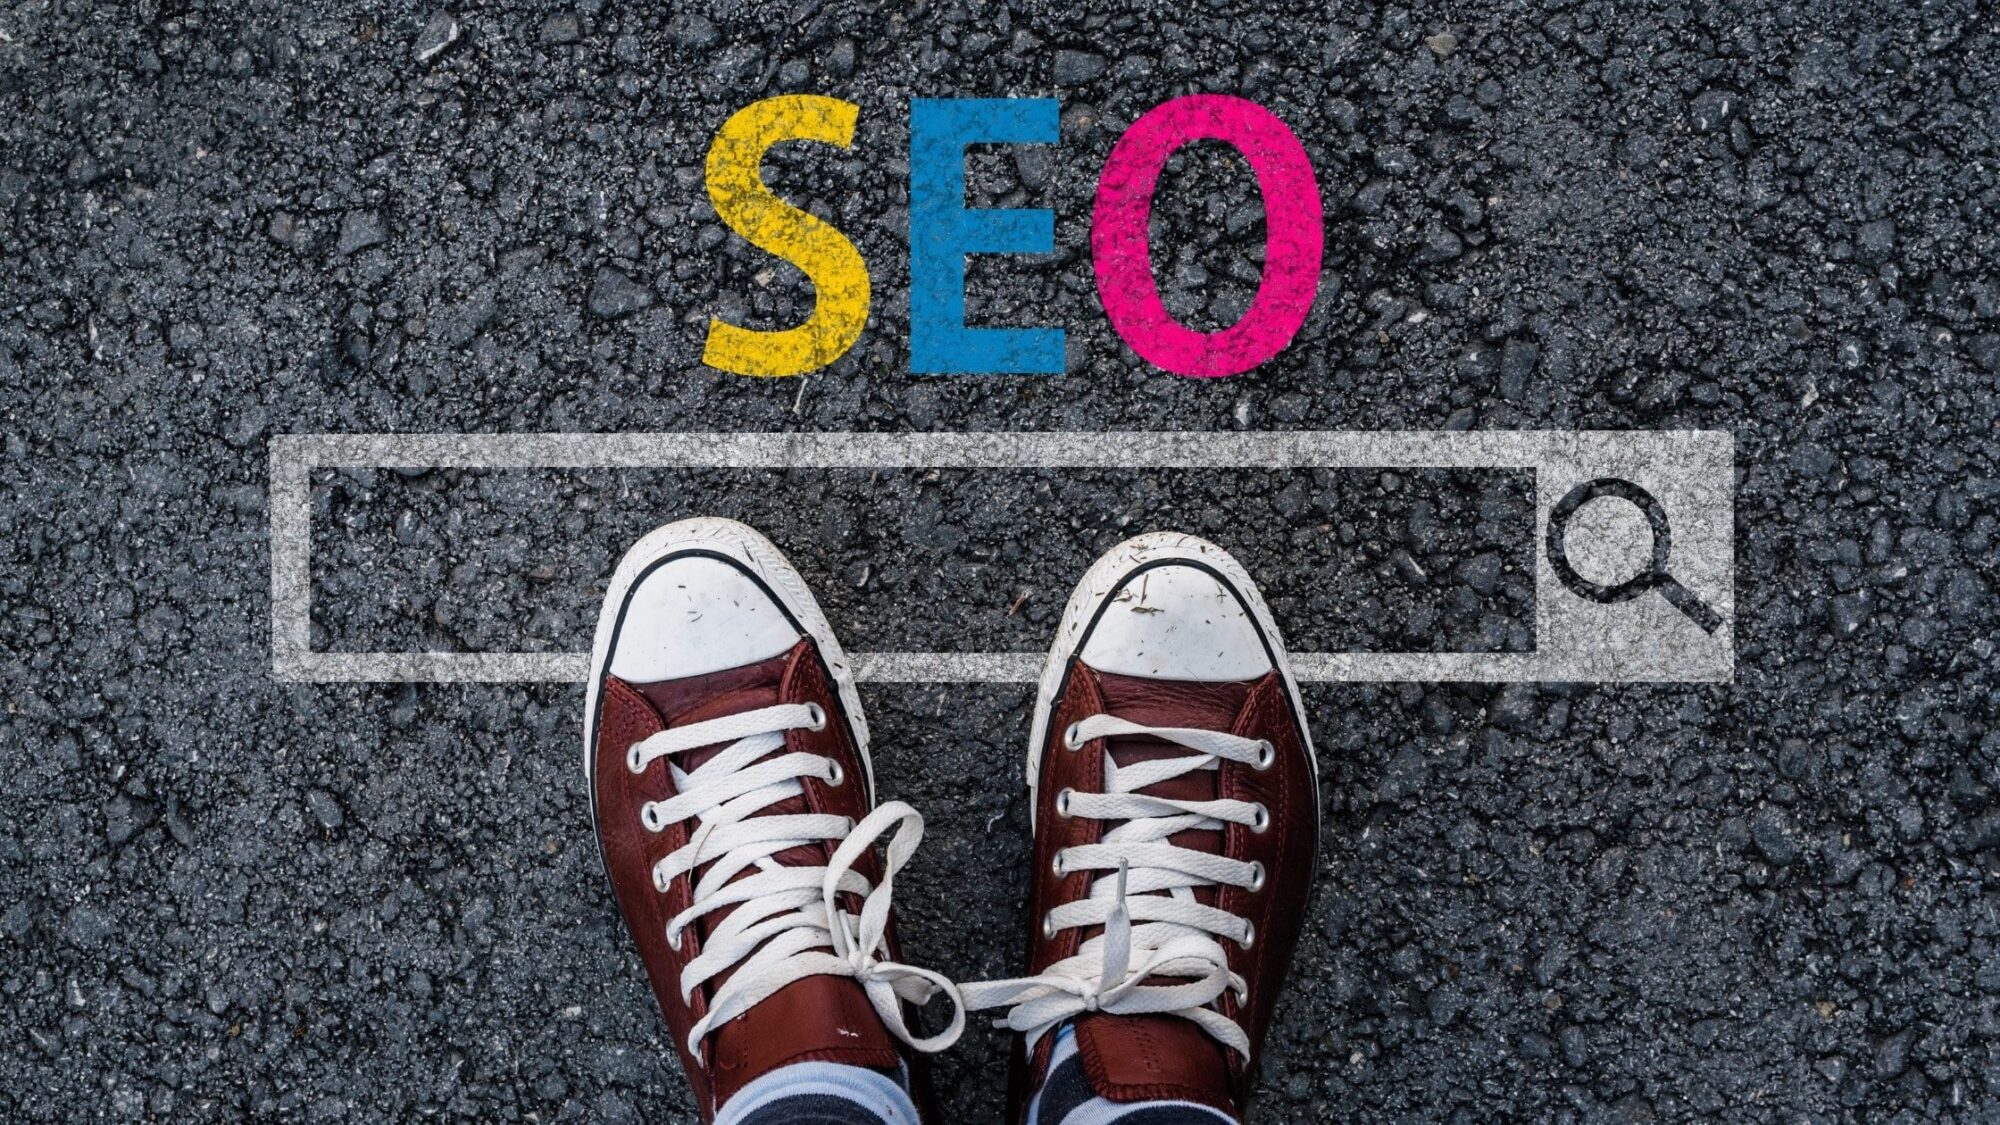 A pair of converse in front of the word SEO.